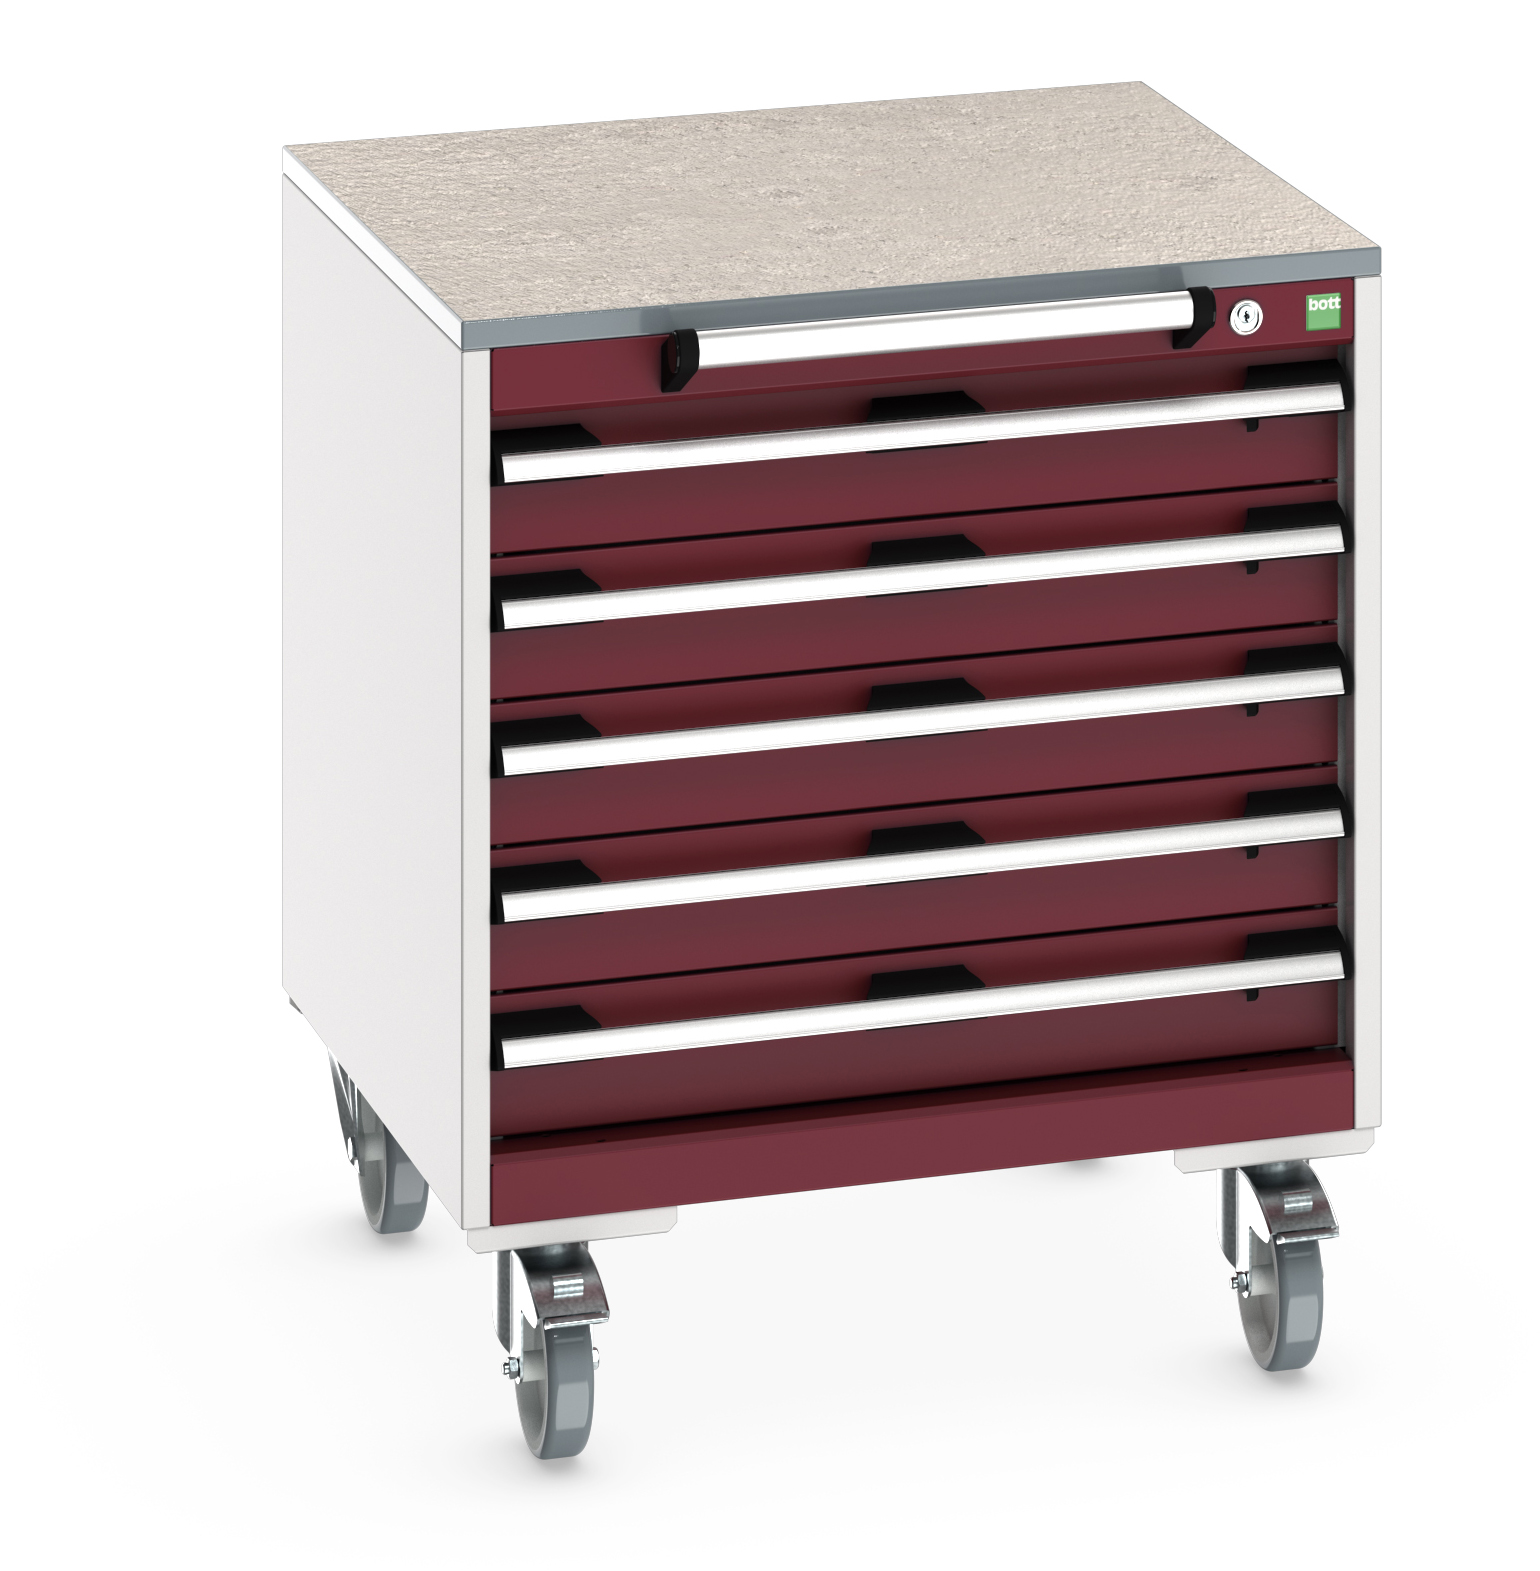 Bott Cubio Mobile Drawer Cabinet With 5 Drawers & Lino Worktop - 40402146.24V